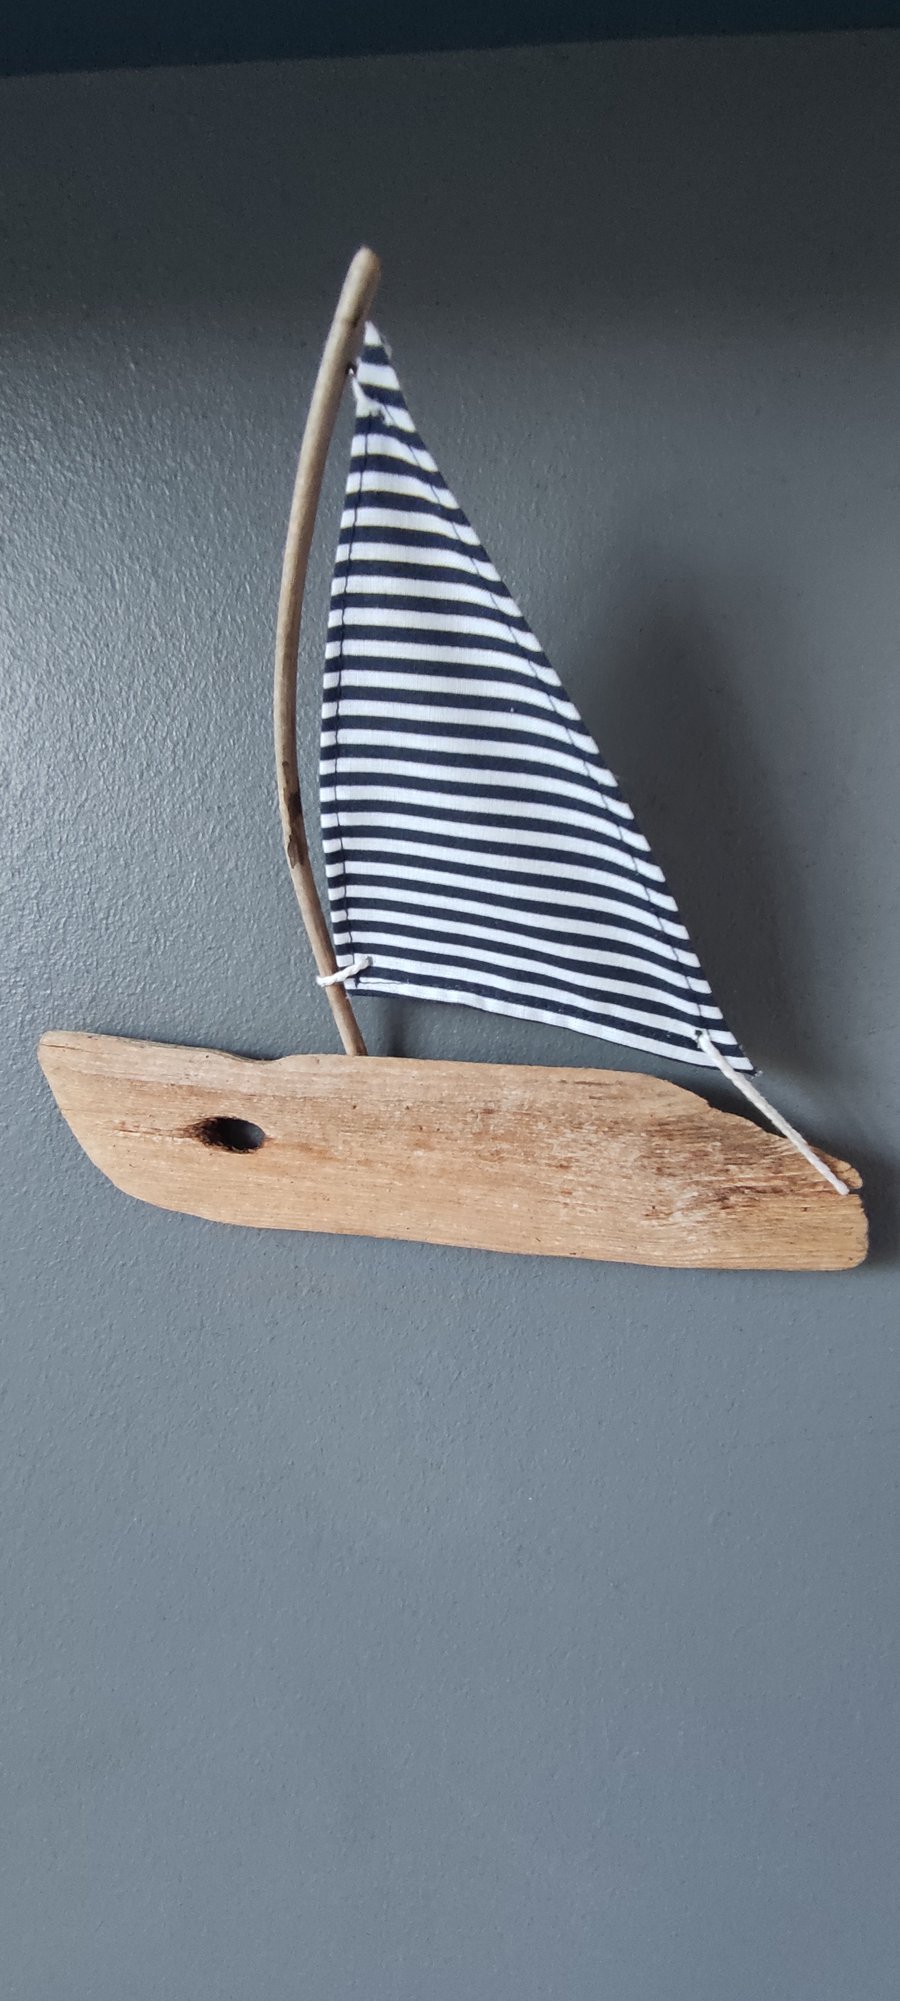 Driftwood small sailboat - wall decoration with hanger